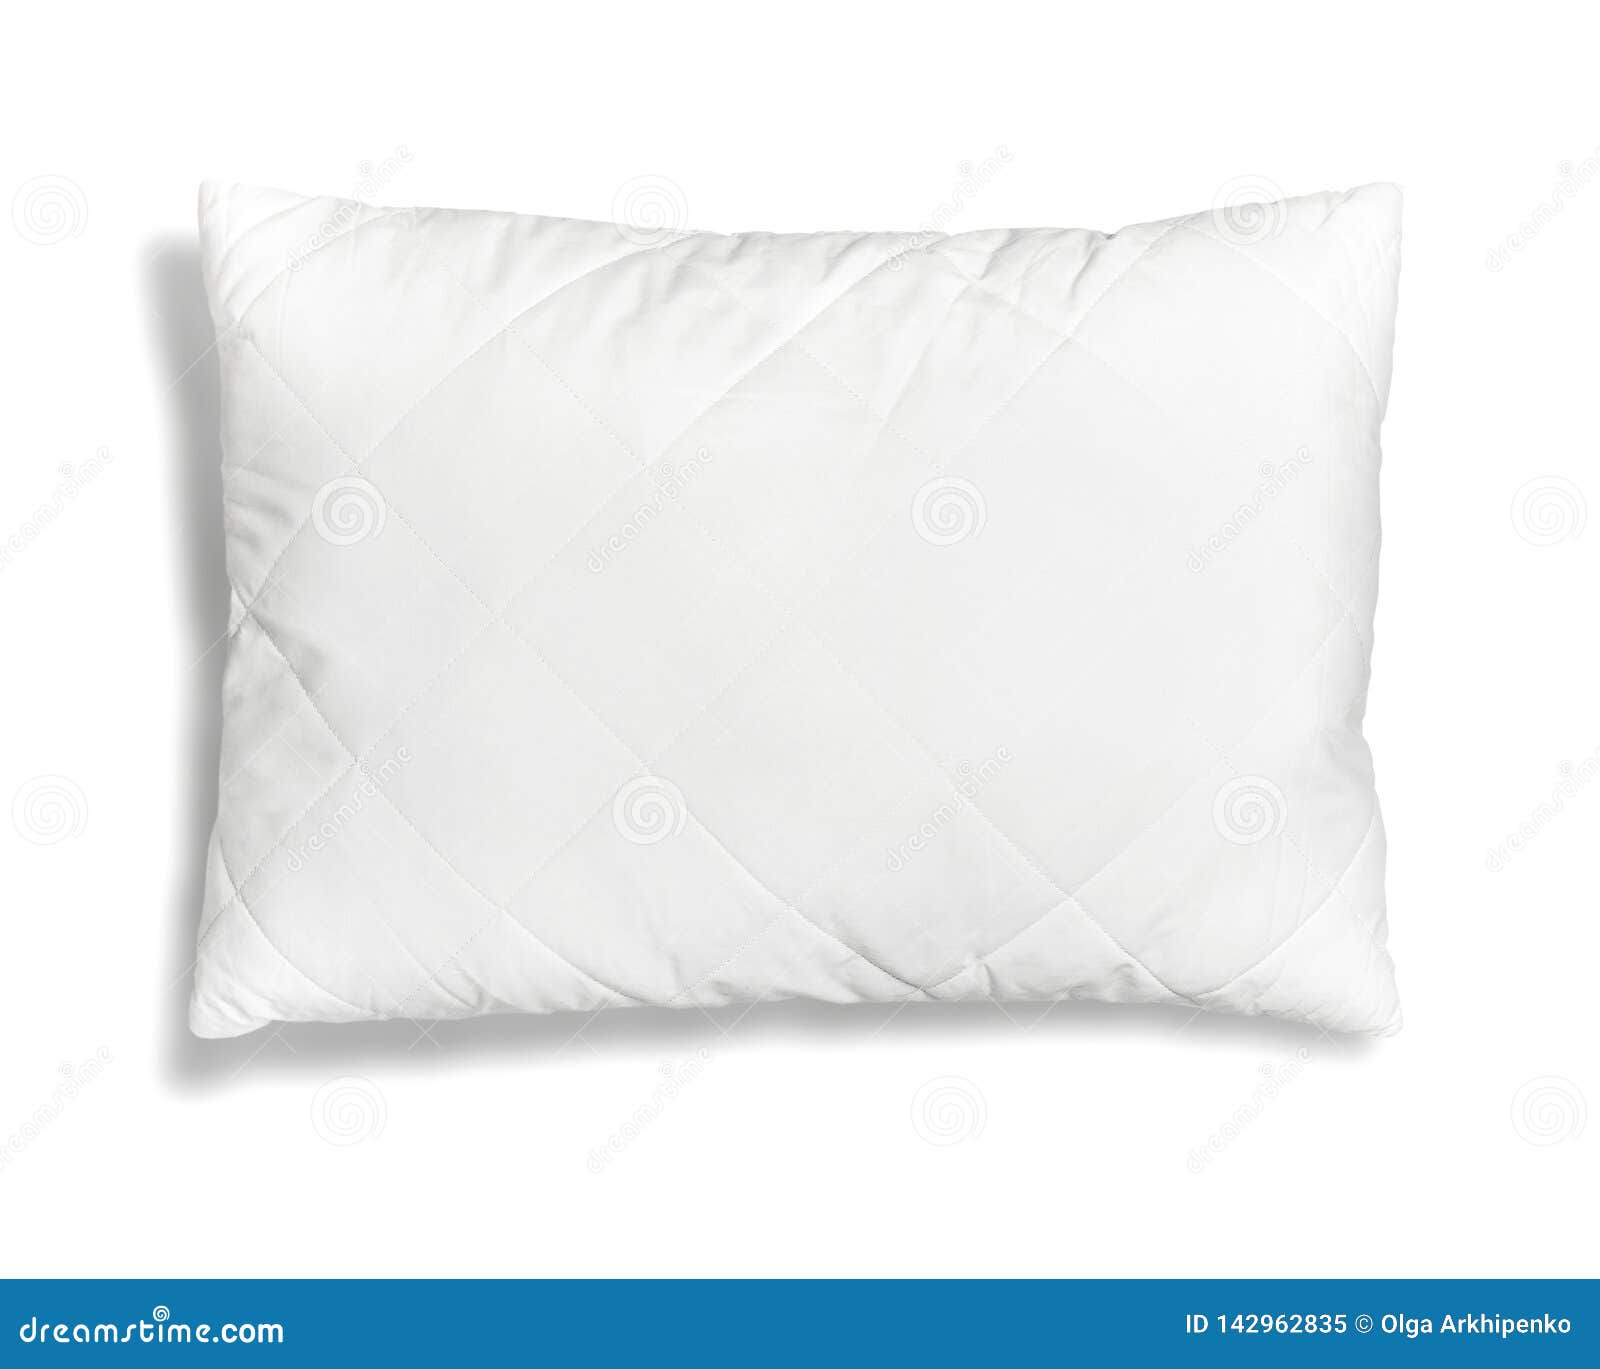 Soft White Pillow Isolated on White Background Top View. Clean Pillow, Interior Item, Bedding Mockup Design Template Stock Image - Image of decorative, mock: 142962835